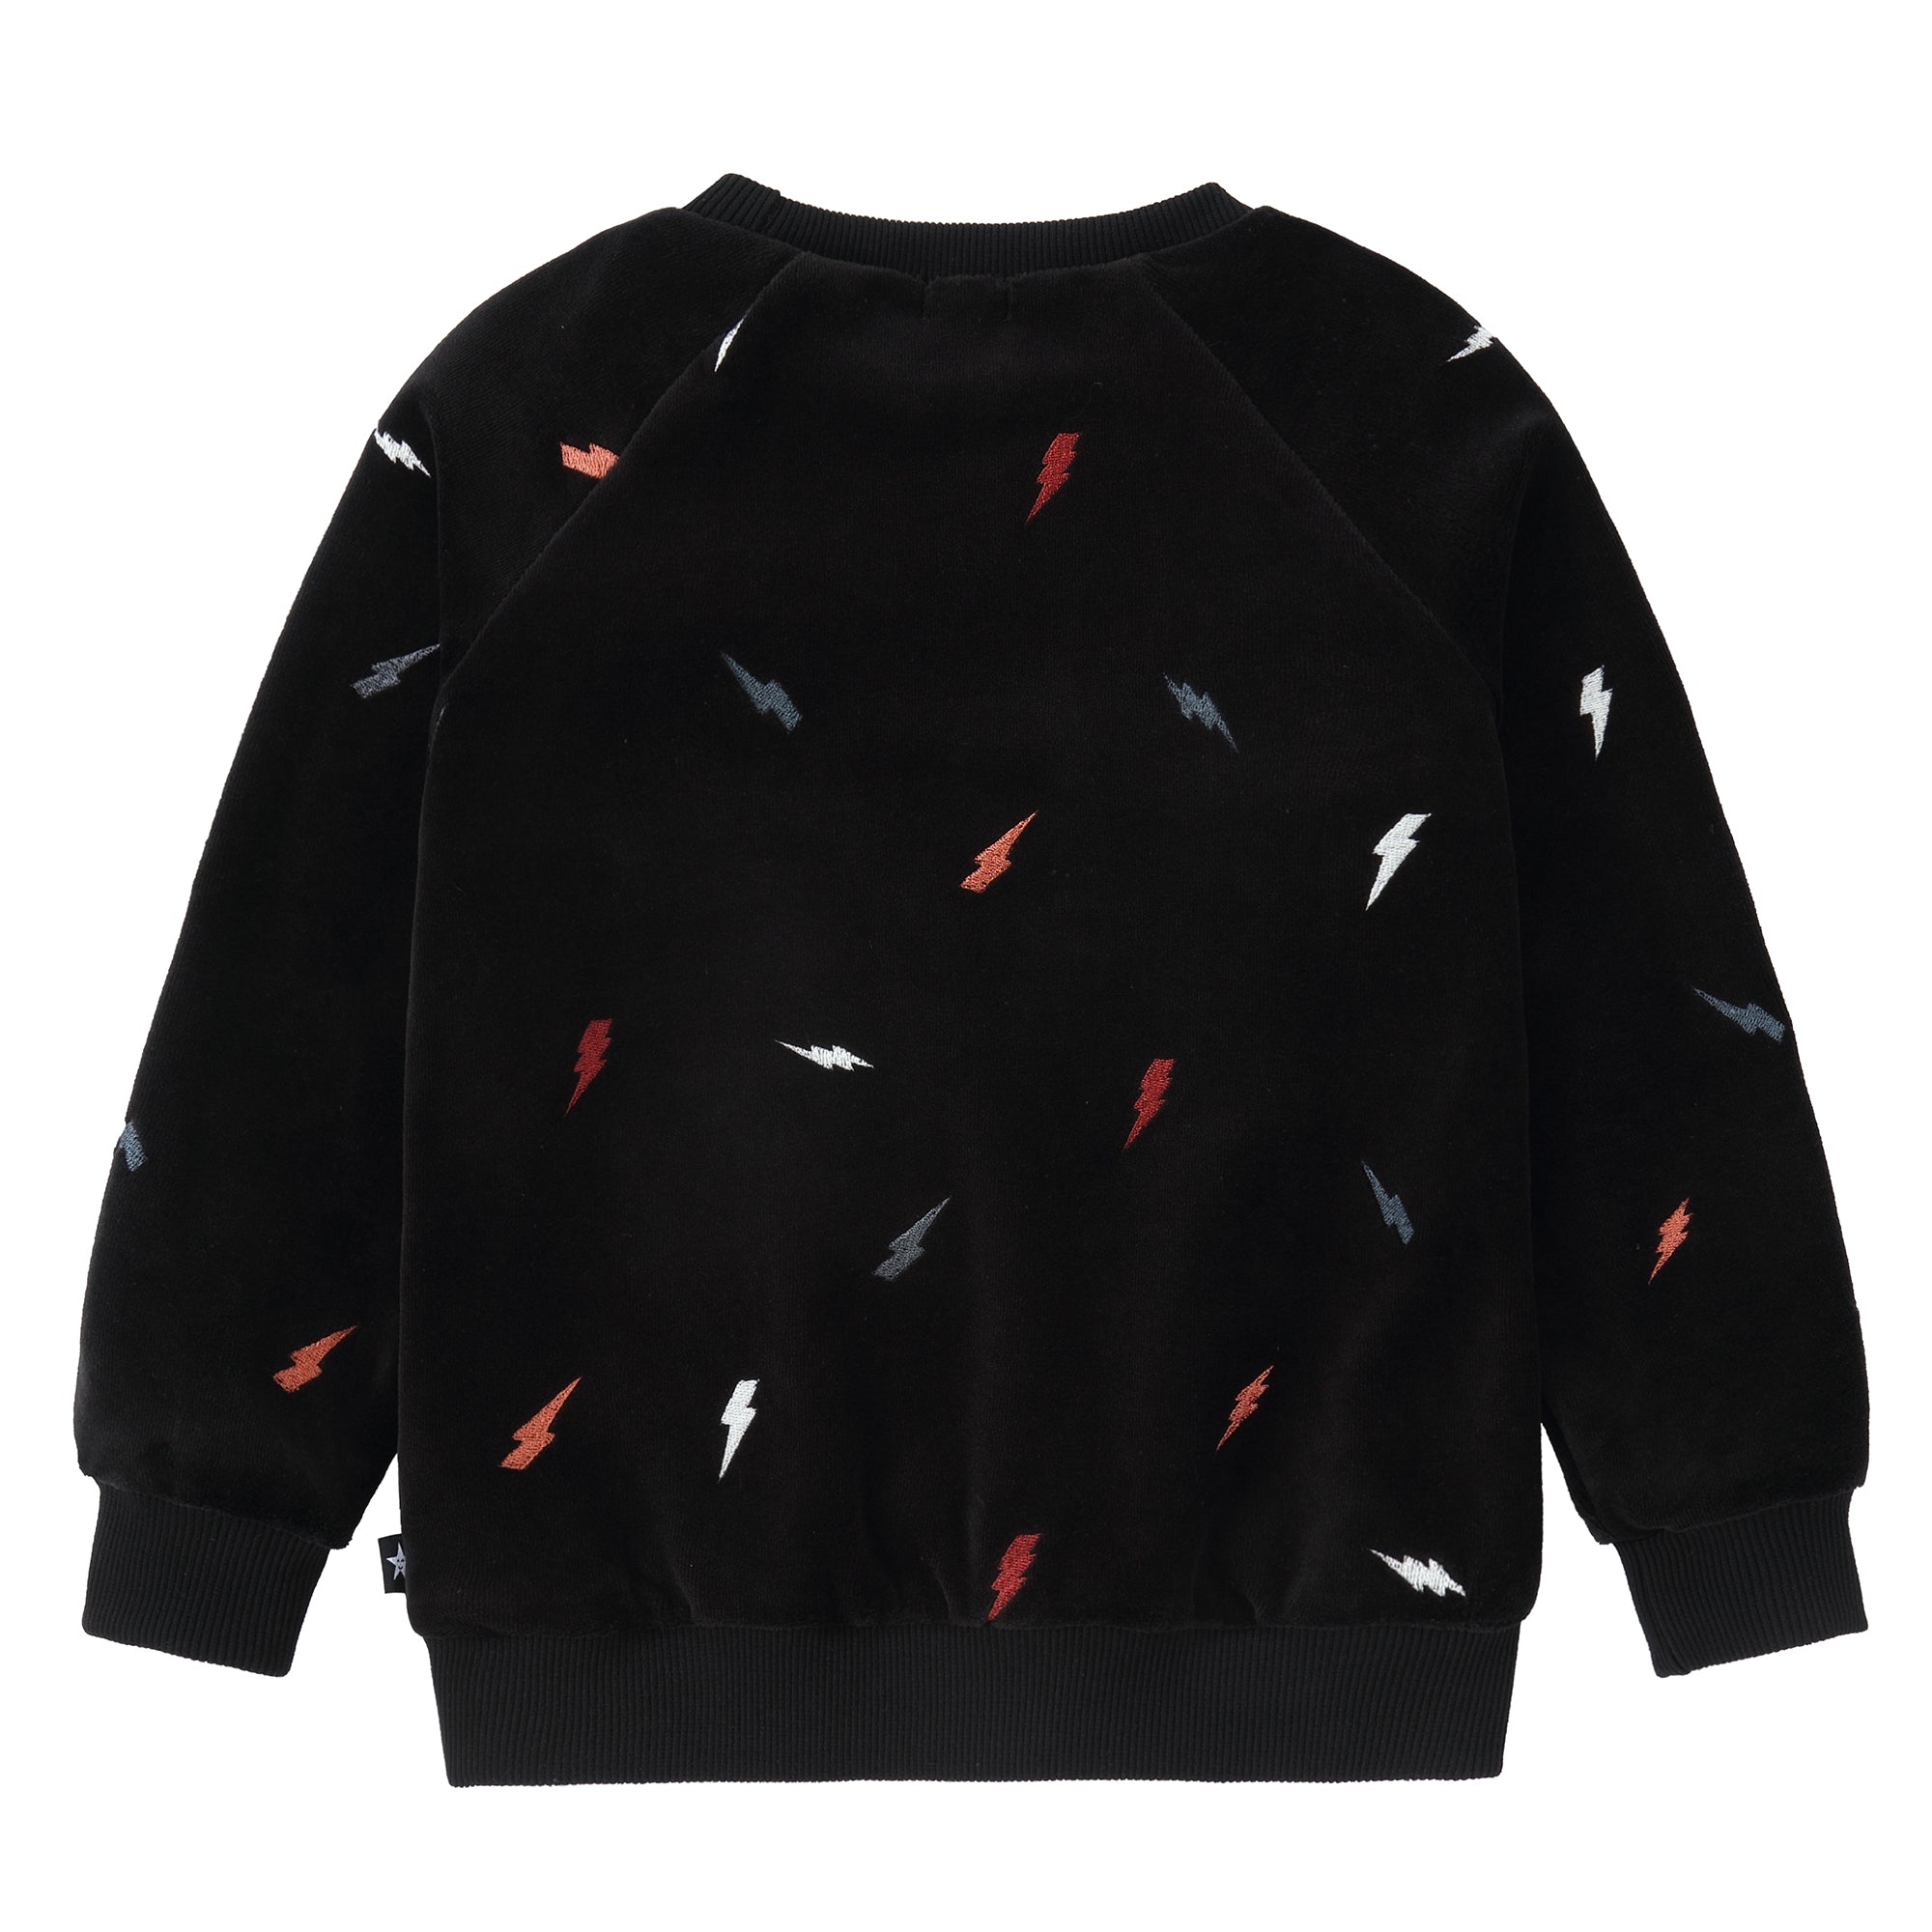 Baby Black Velour Sweatshirt With Embroidered Lightning Bolts